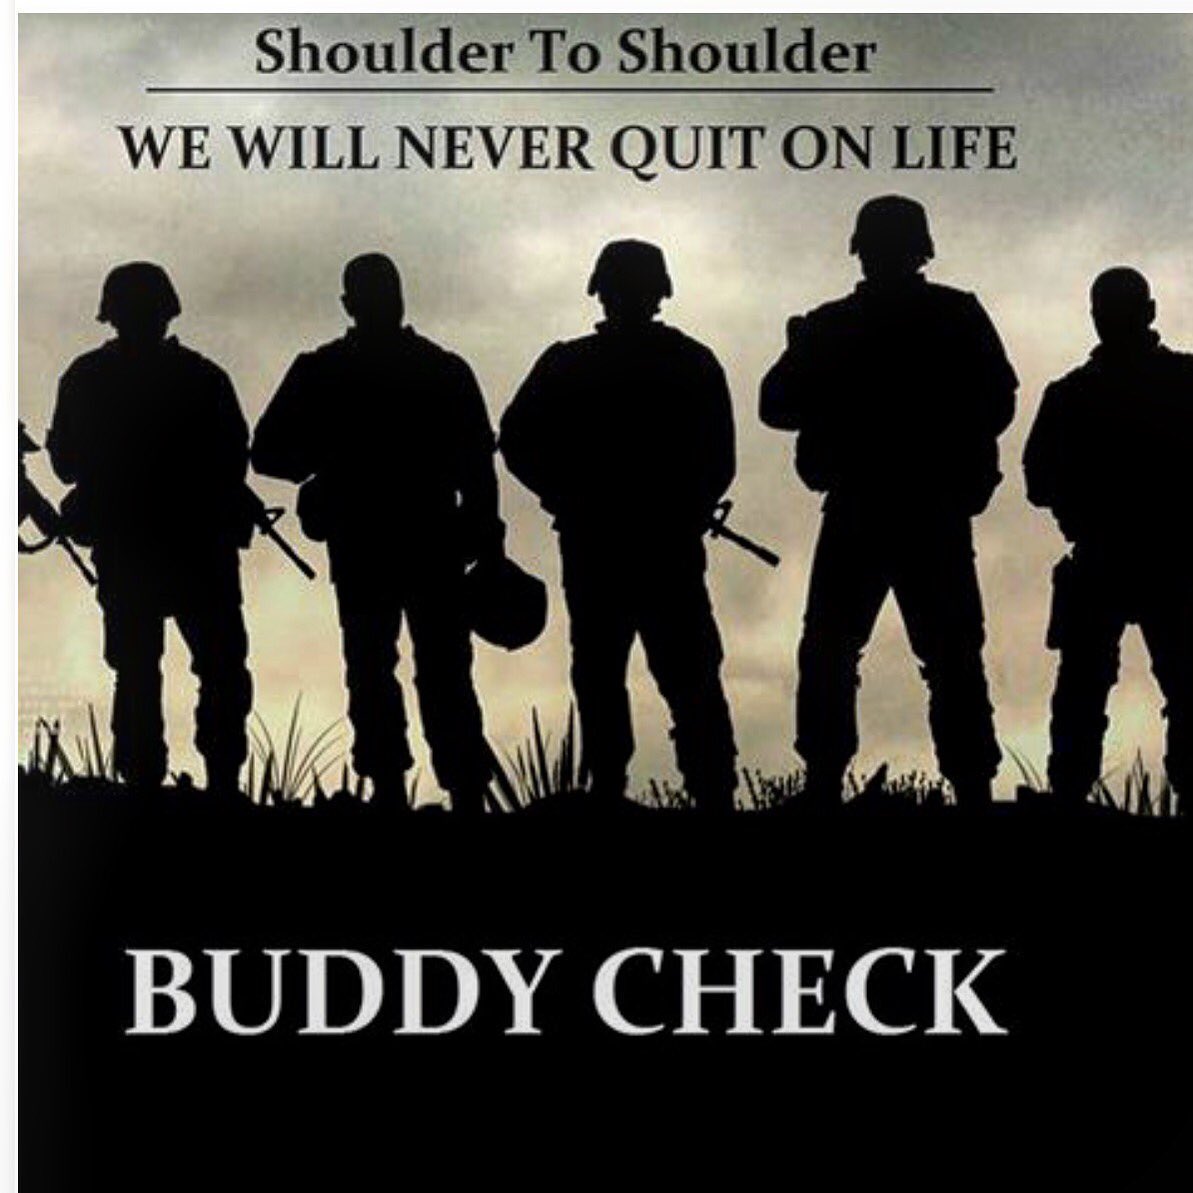 Buddy Check Wednesday 👊 Hope you're all doing ok 👍 Lend an ear, reach out a hand 🤝 No battle is fought alone 👊